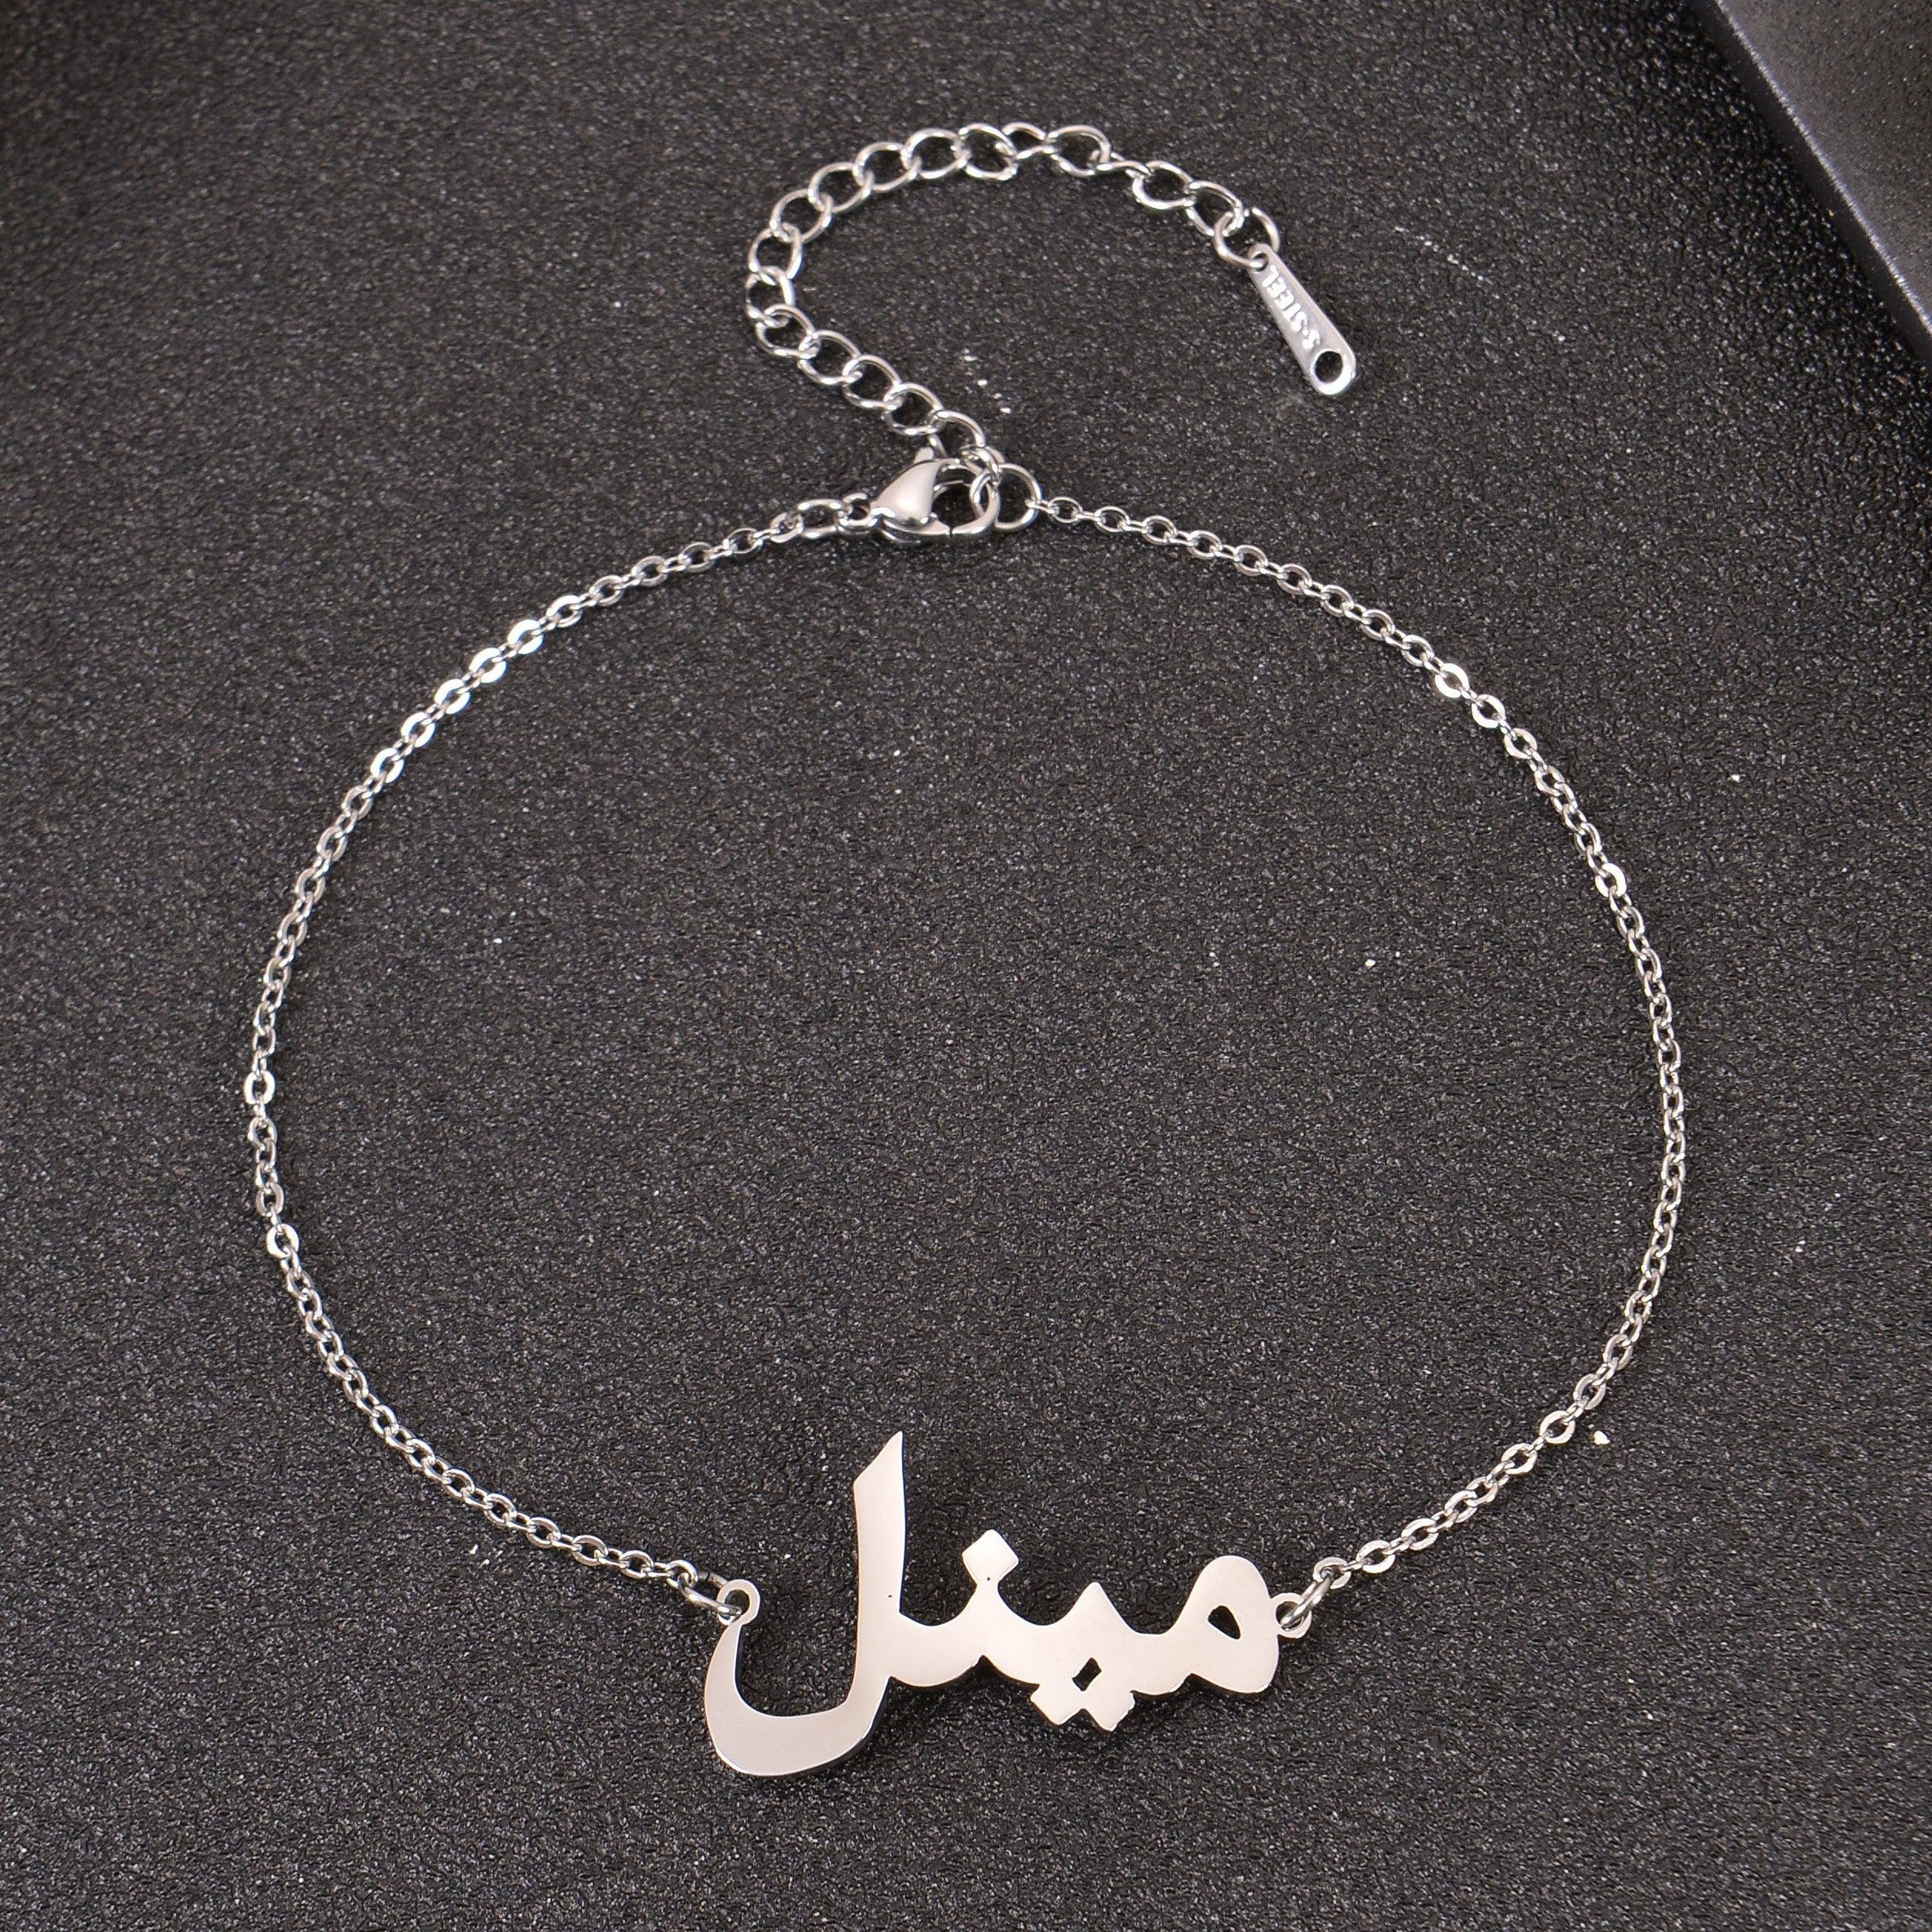 Amazon.com: FUJIN Personalized 925 Sterling Silver Arabic Persian Name  Bracelet Custom Made with Any Name (Gold): Clothing, Shoes & Jewelry